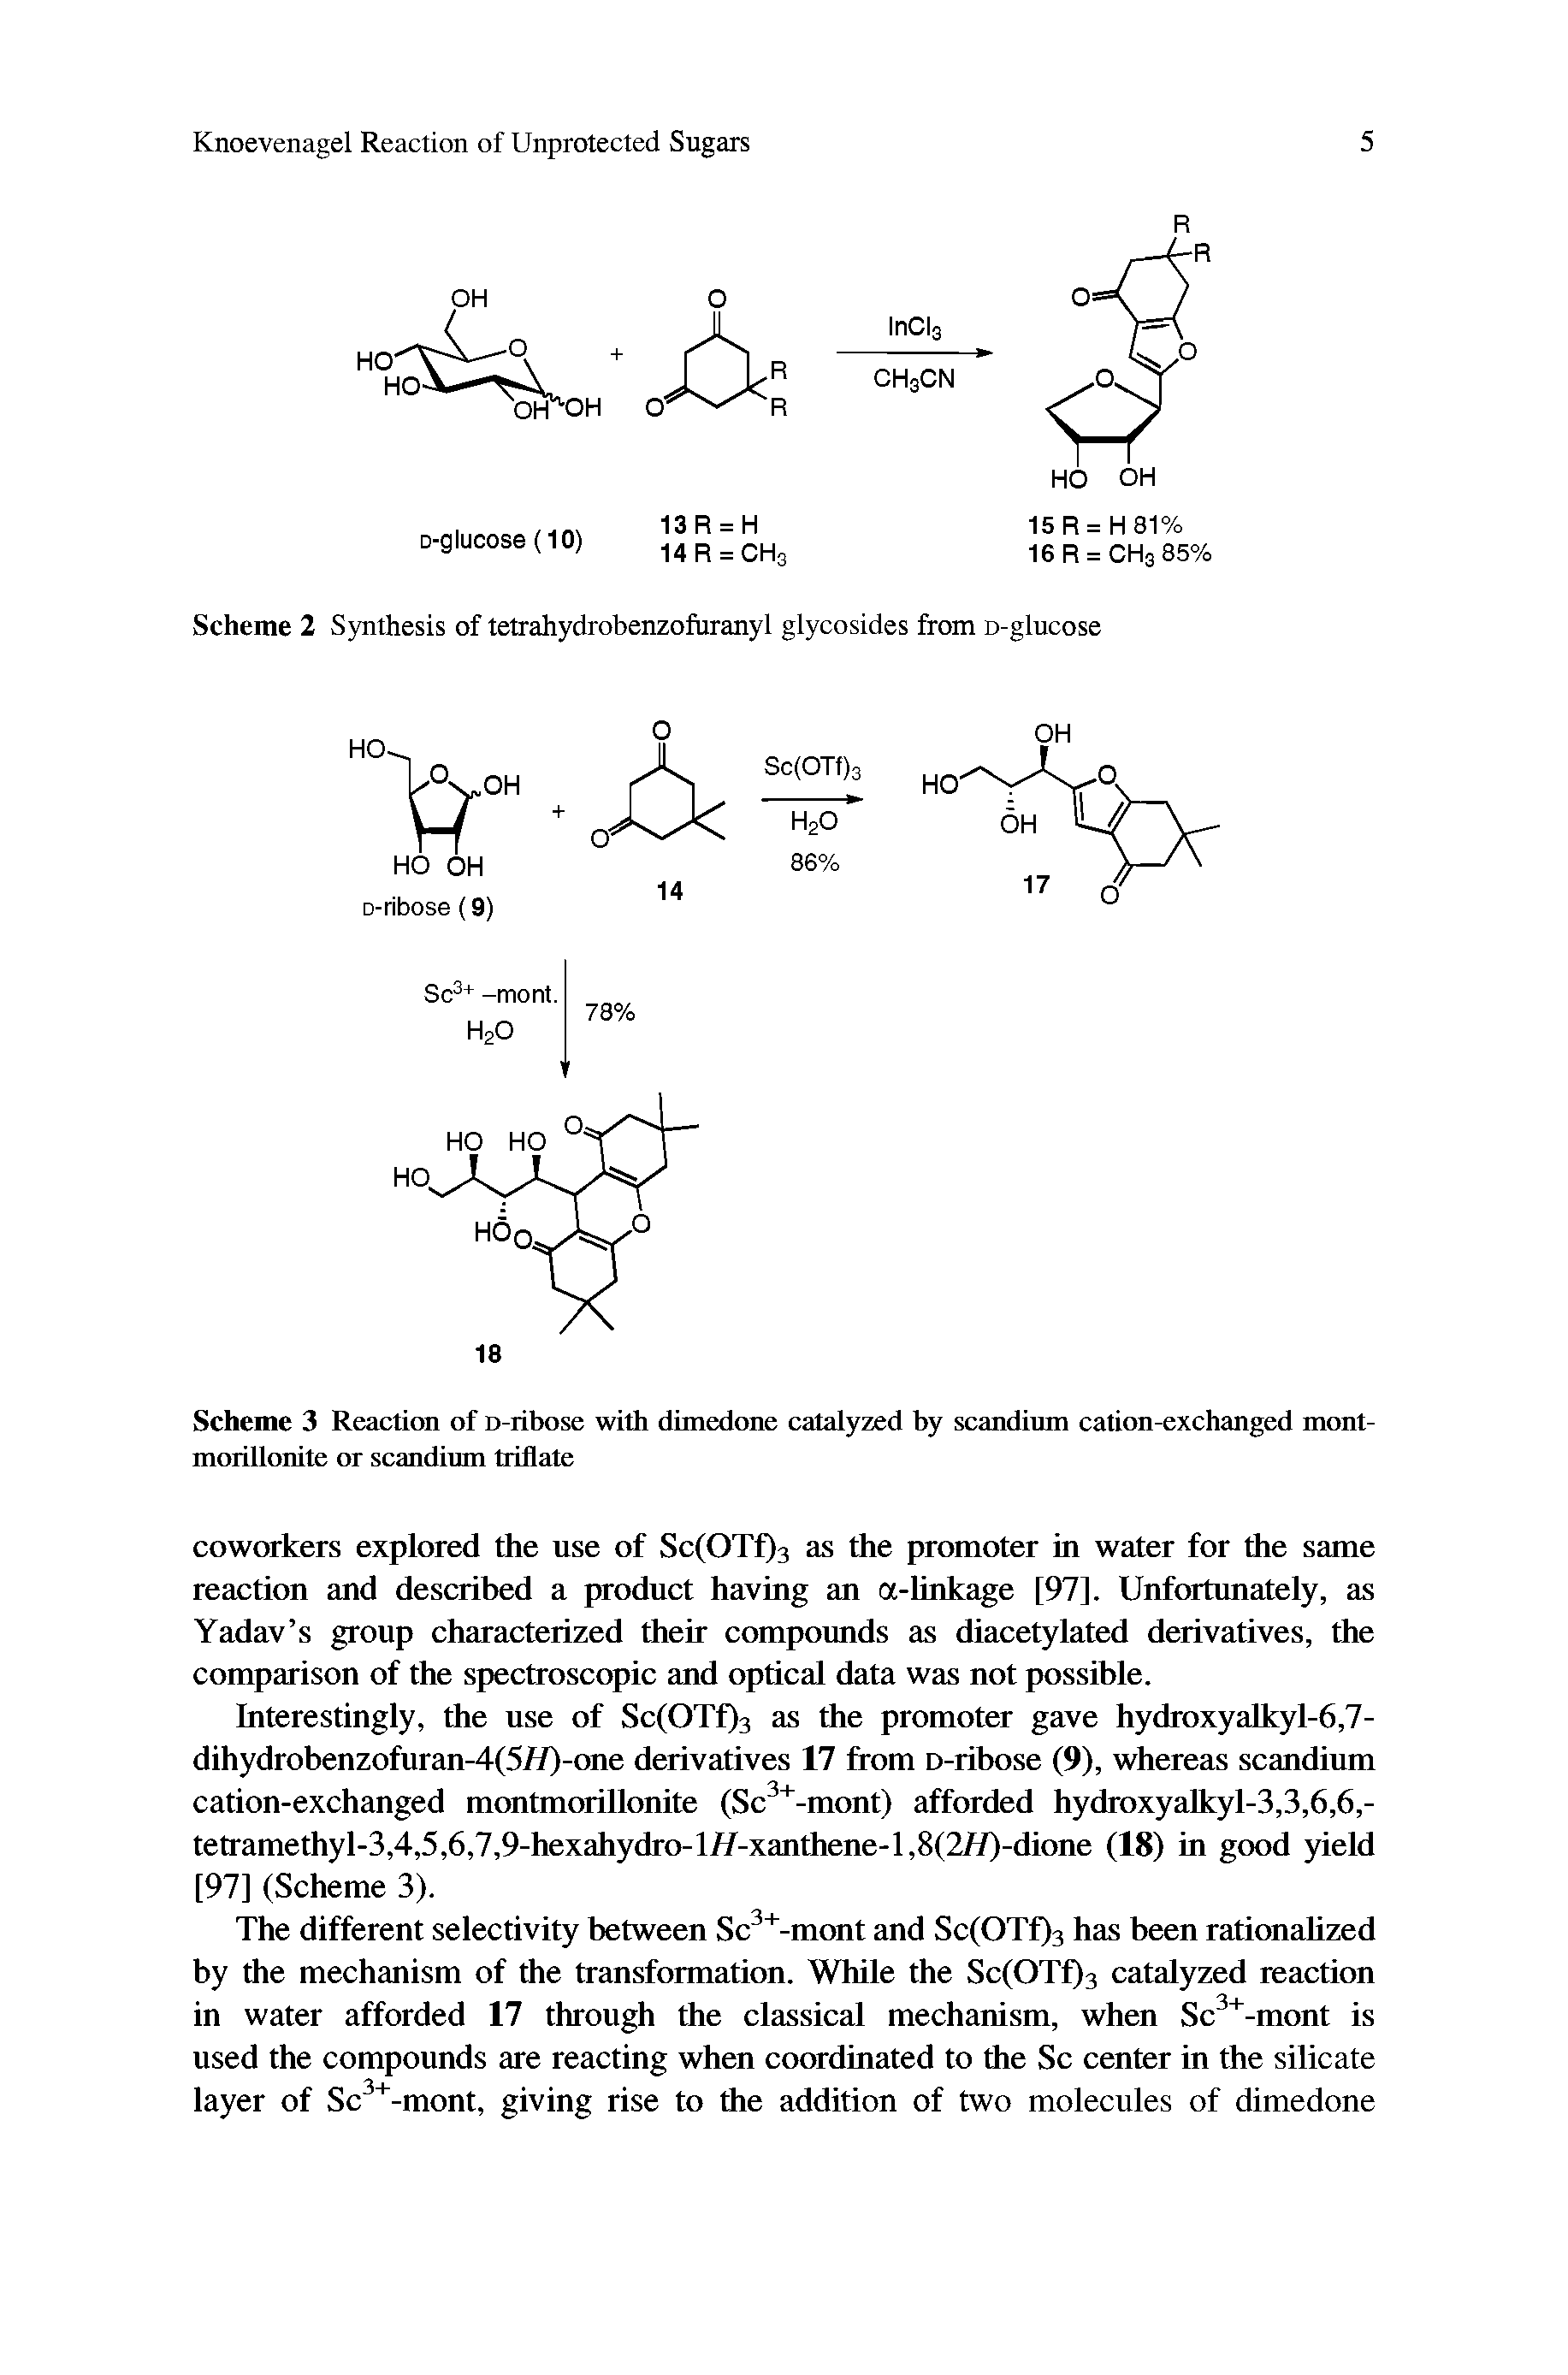 Scheme 3 Reaction of D-ribose with dimedone catalyzed by scandium cation-exchanged mont-morillonite or scandium triflate...